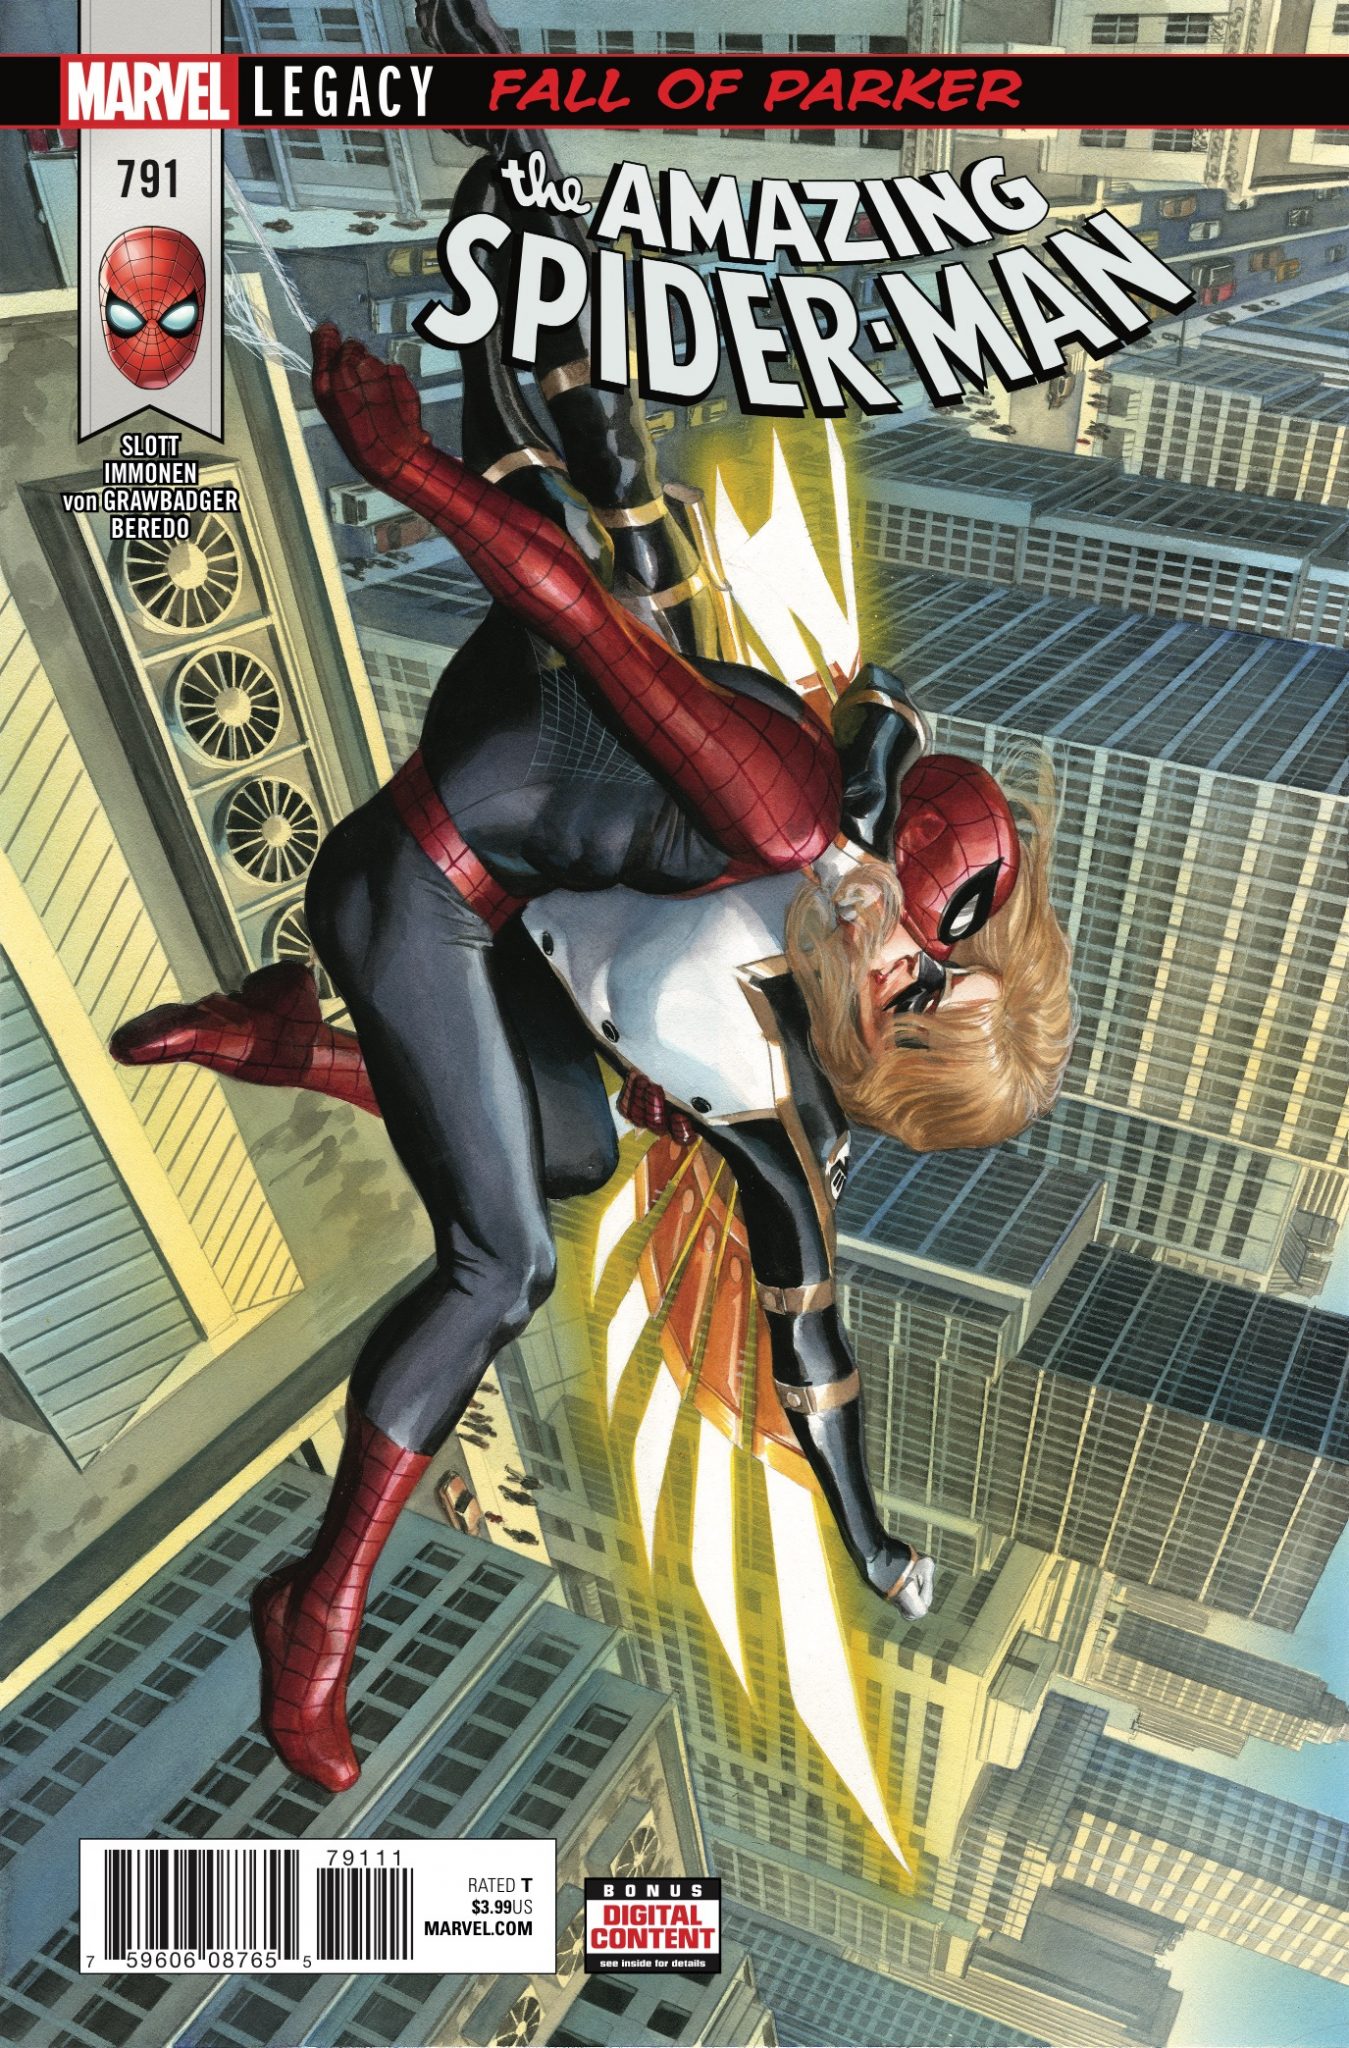 Amazing Spider-Man #791 Review